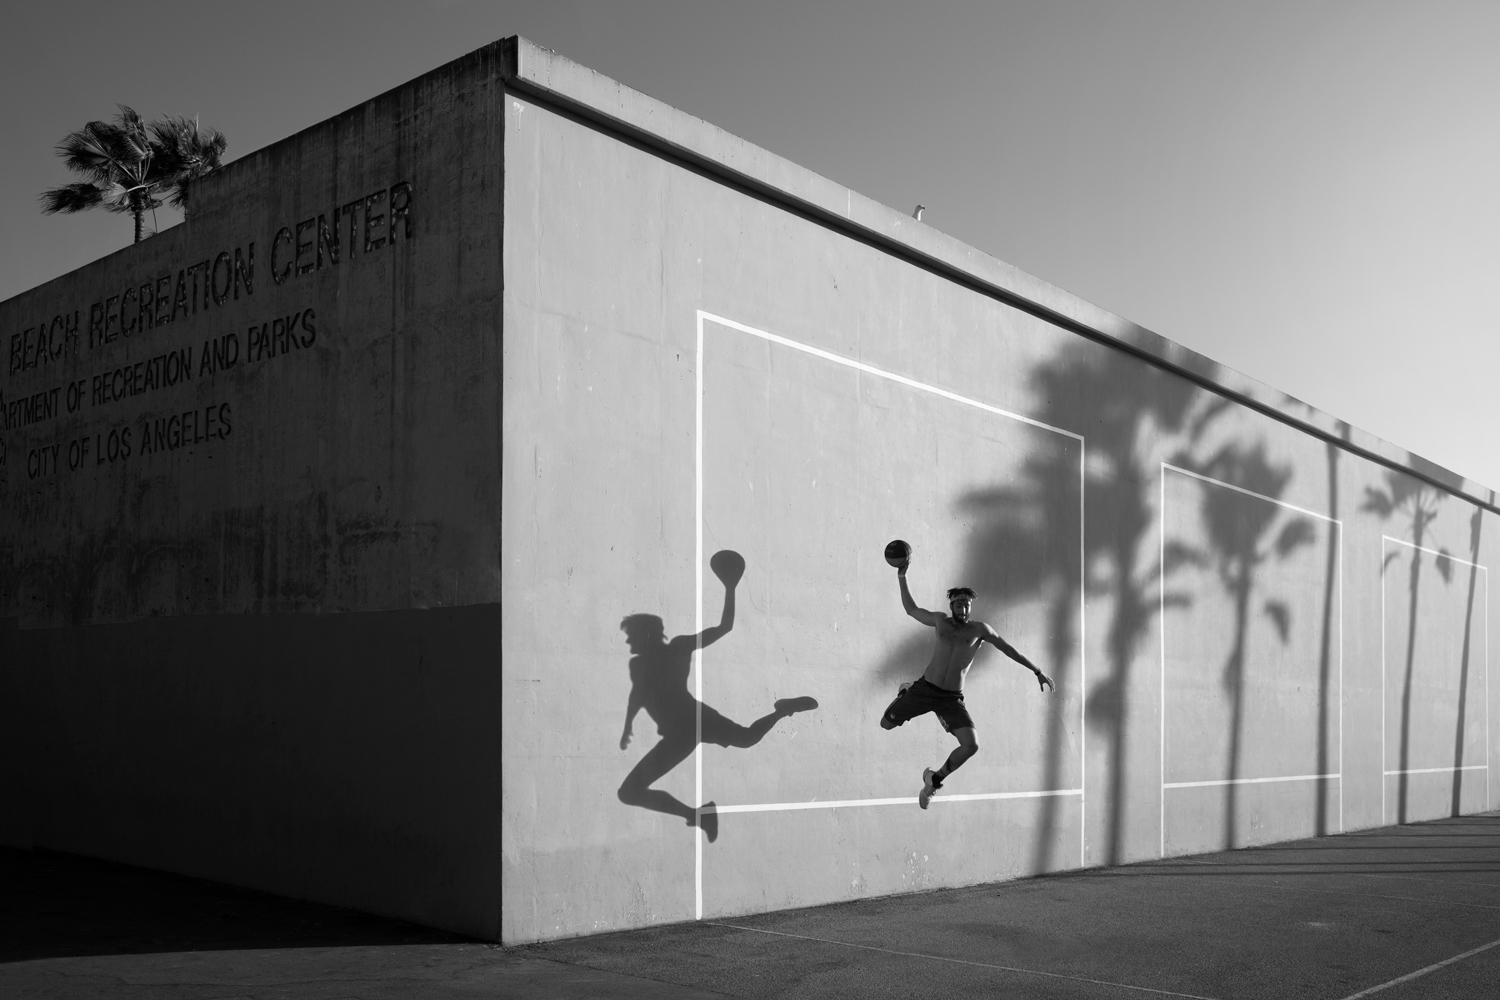 Guy jumping in front of the venice beach tennis court with his shaddow on the wall